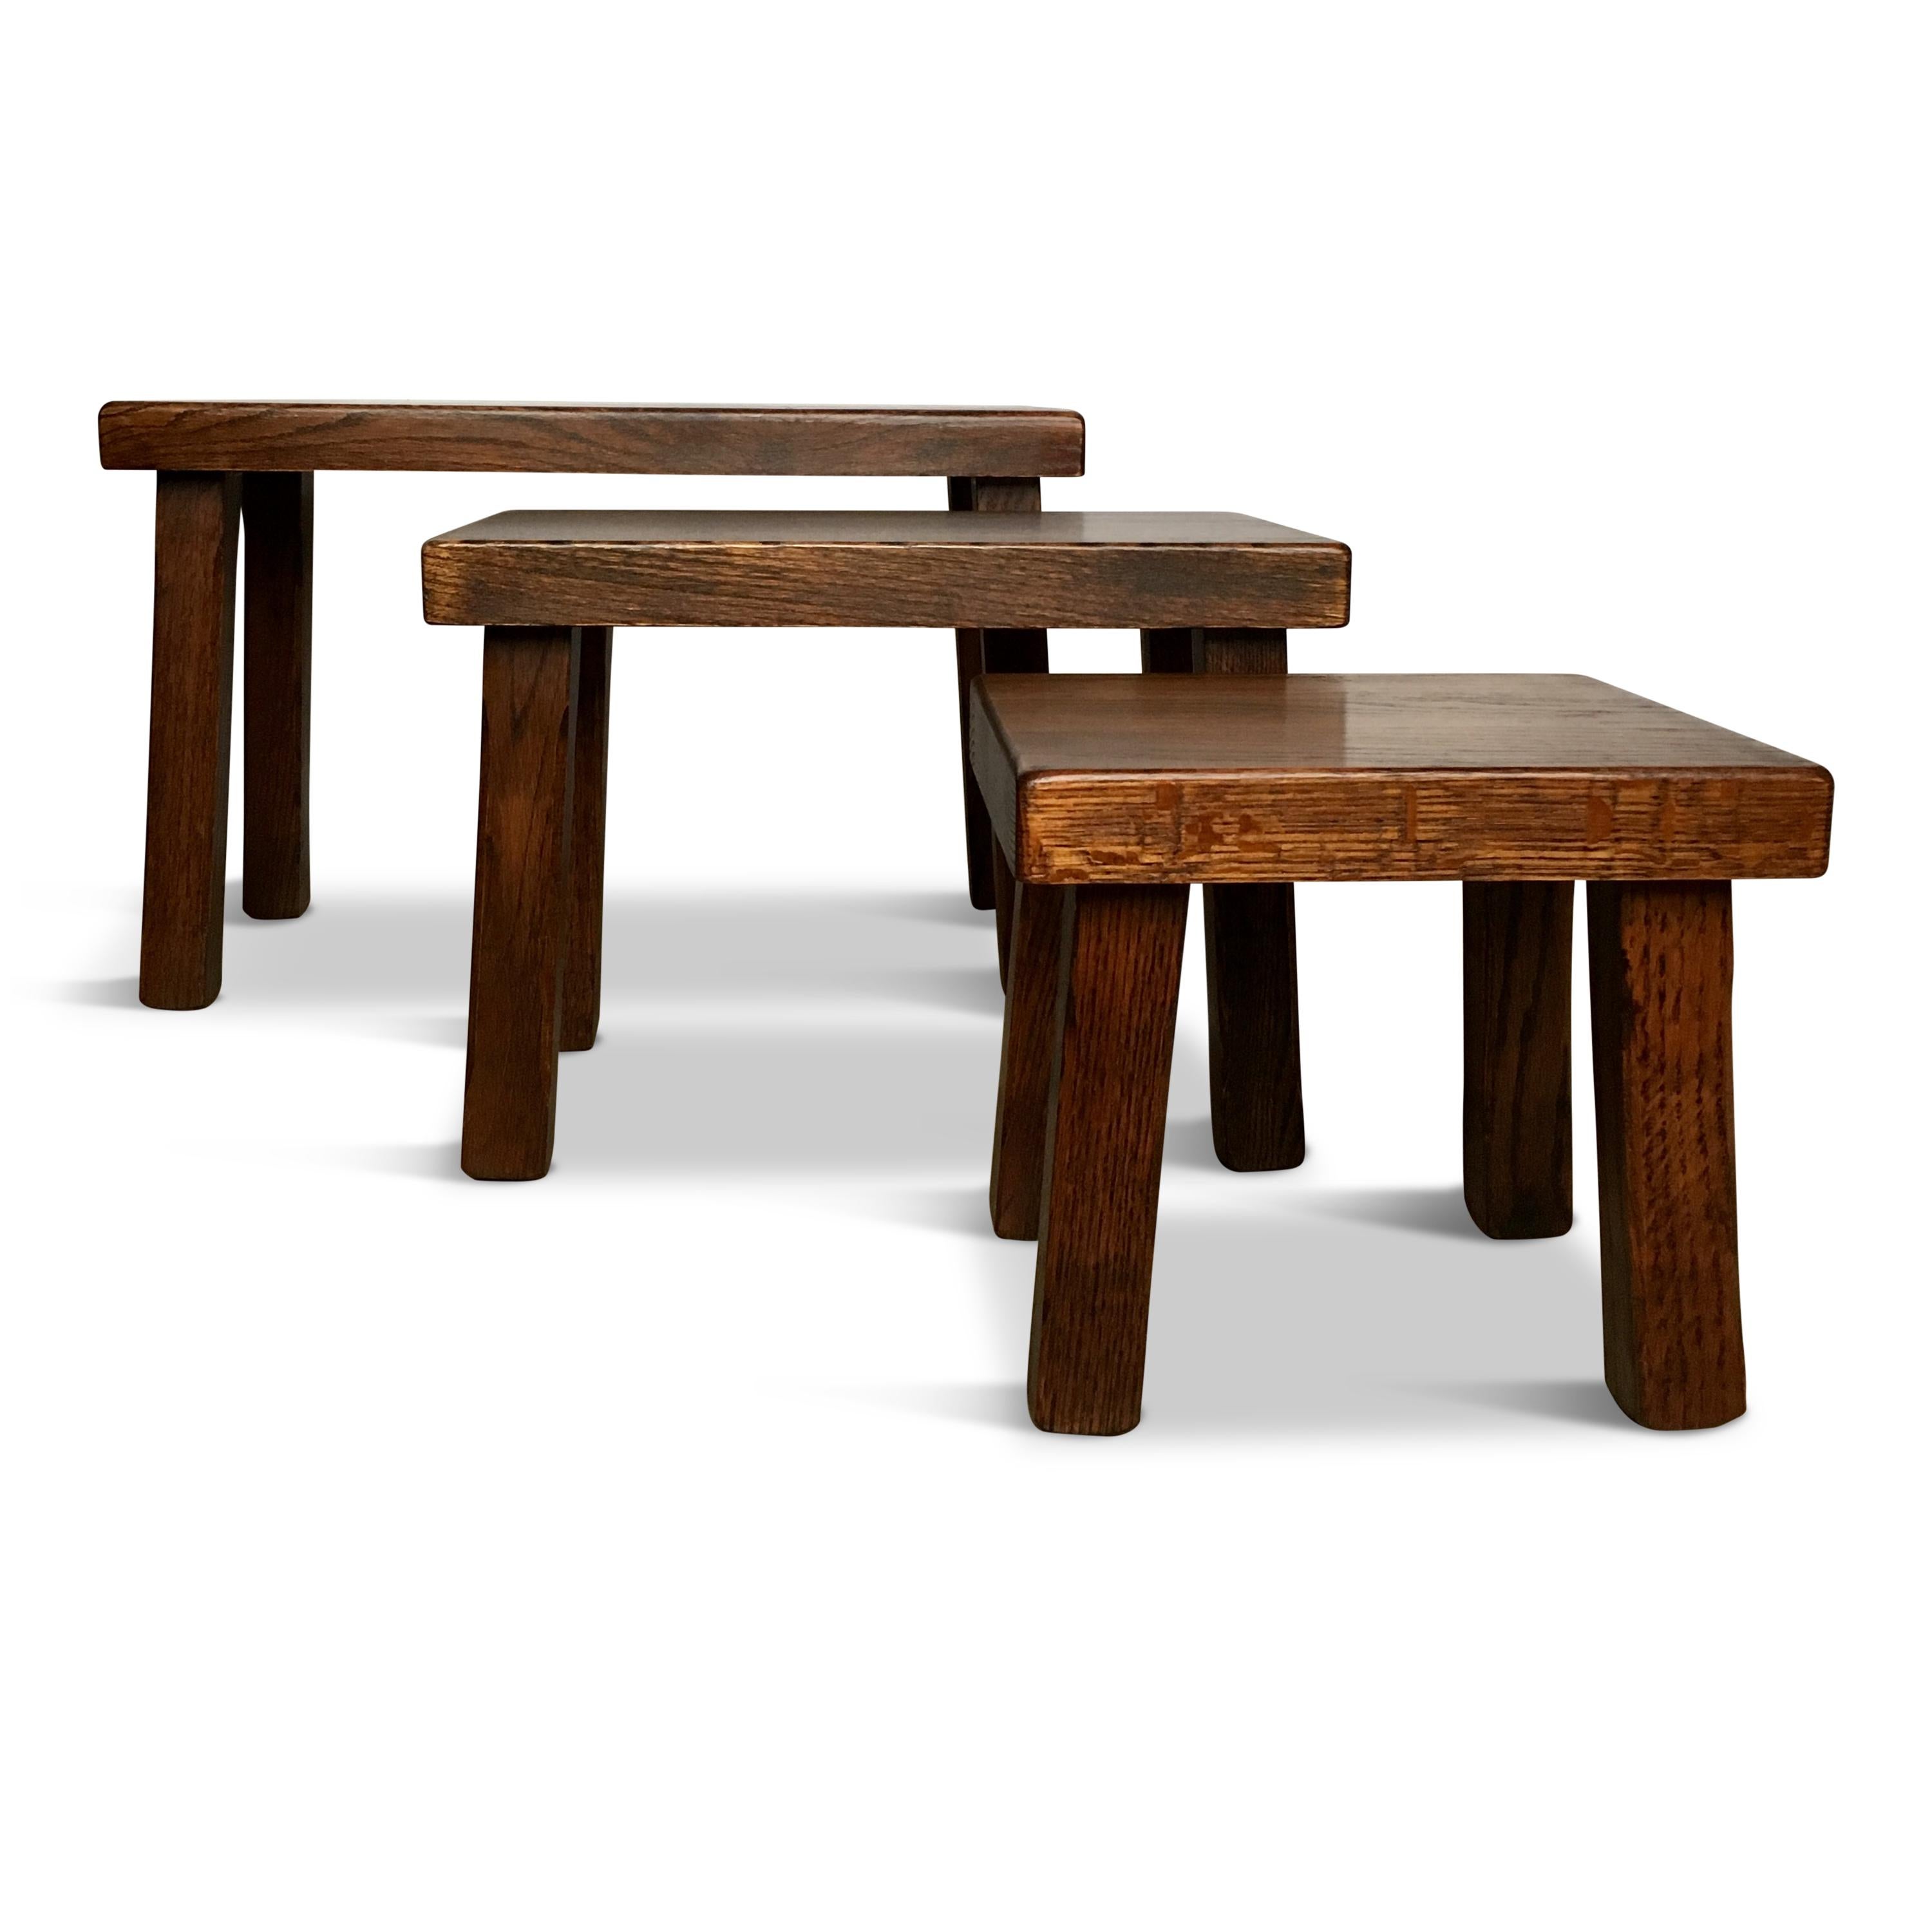 – Heavy stacking tables or benches
– Clear brutalist form
Big – H 38cm, W 59cm, D 30cm
Medium – H 32cm, W 44cm, D 28cm
Small – H 26cm, W 30cm, D 26cm



